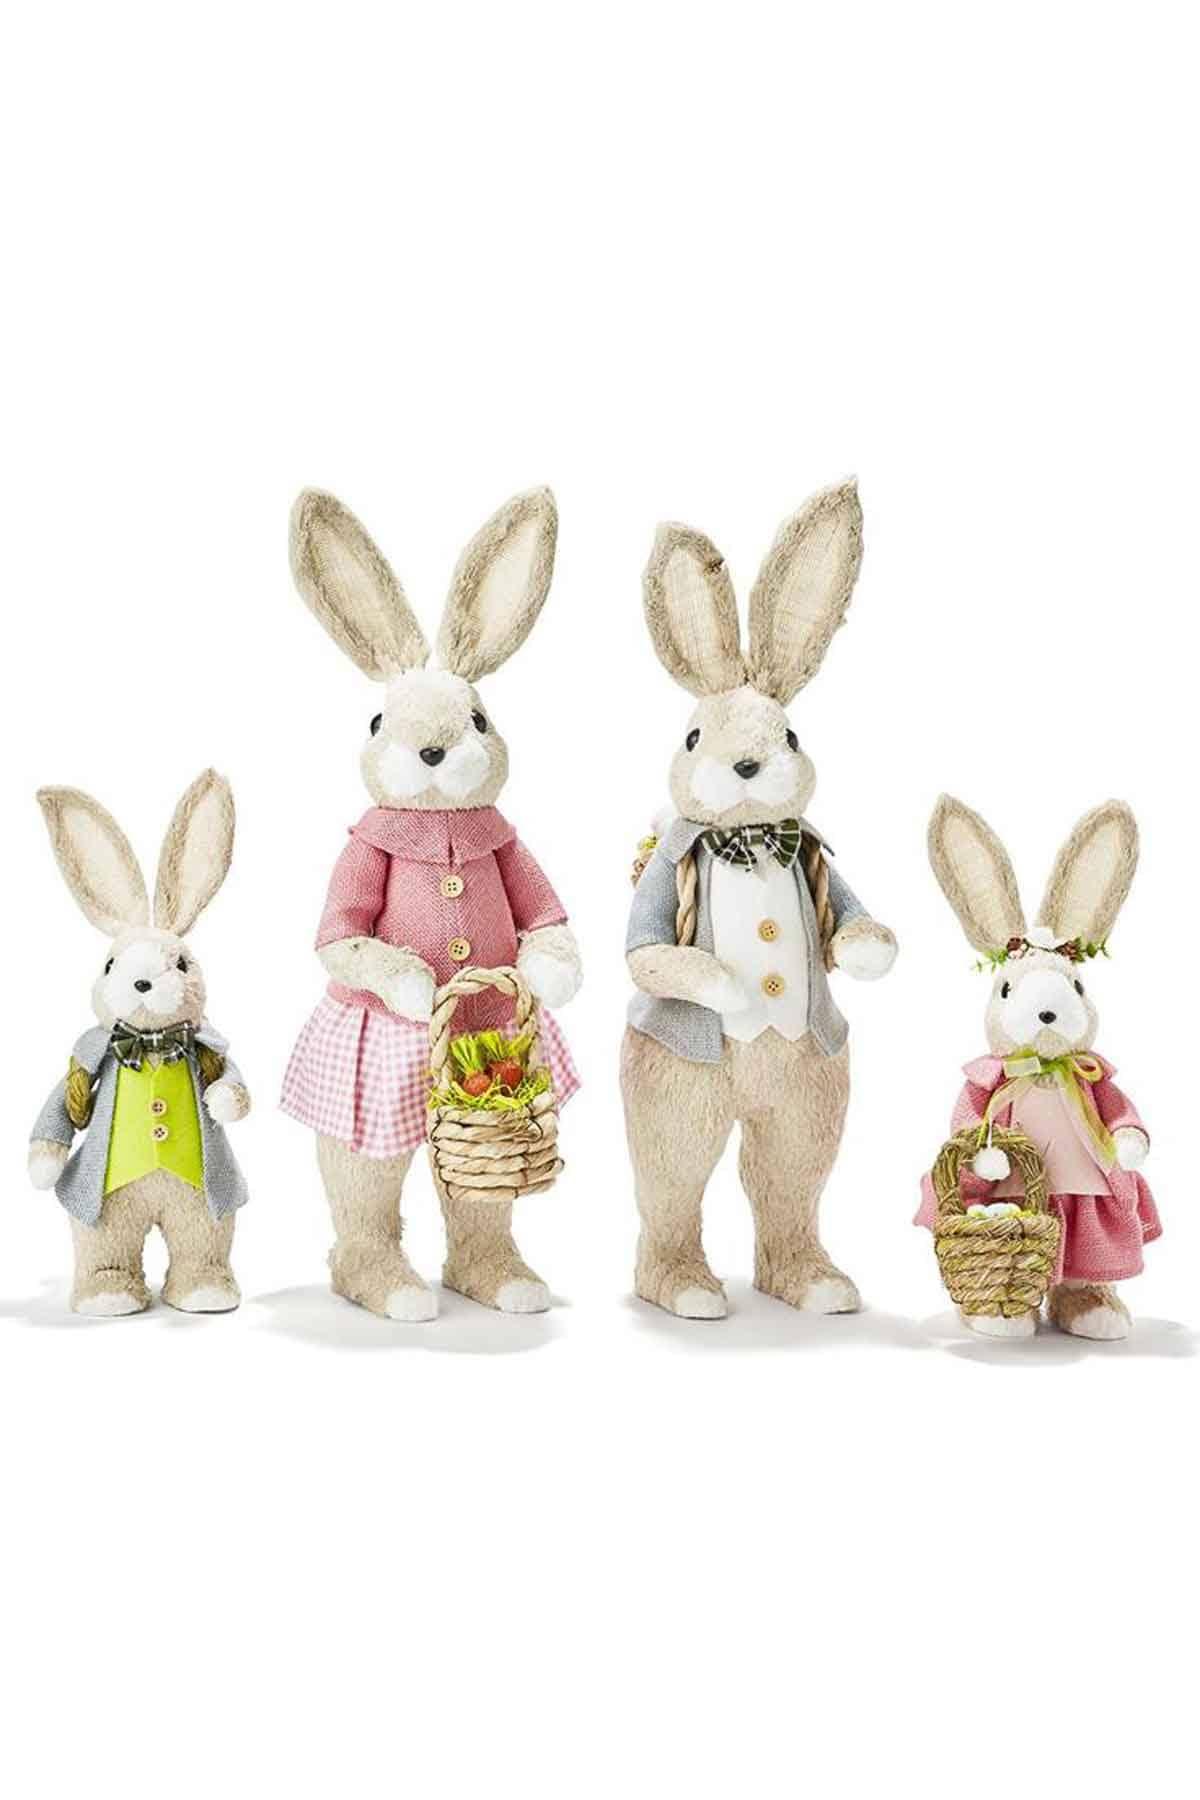 Handcrafted Bunnies-Two's Company - Inspire Me